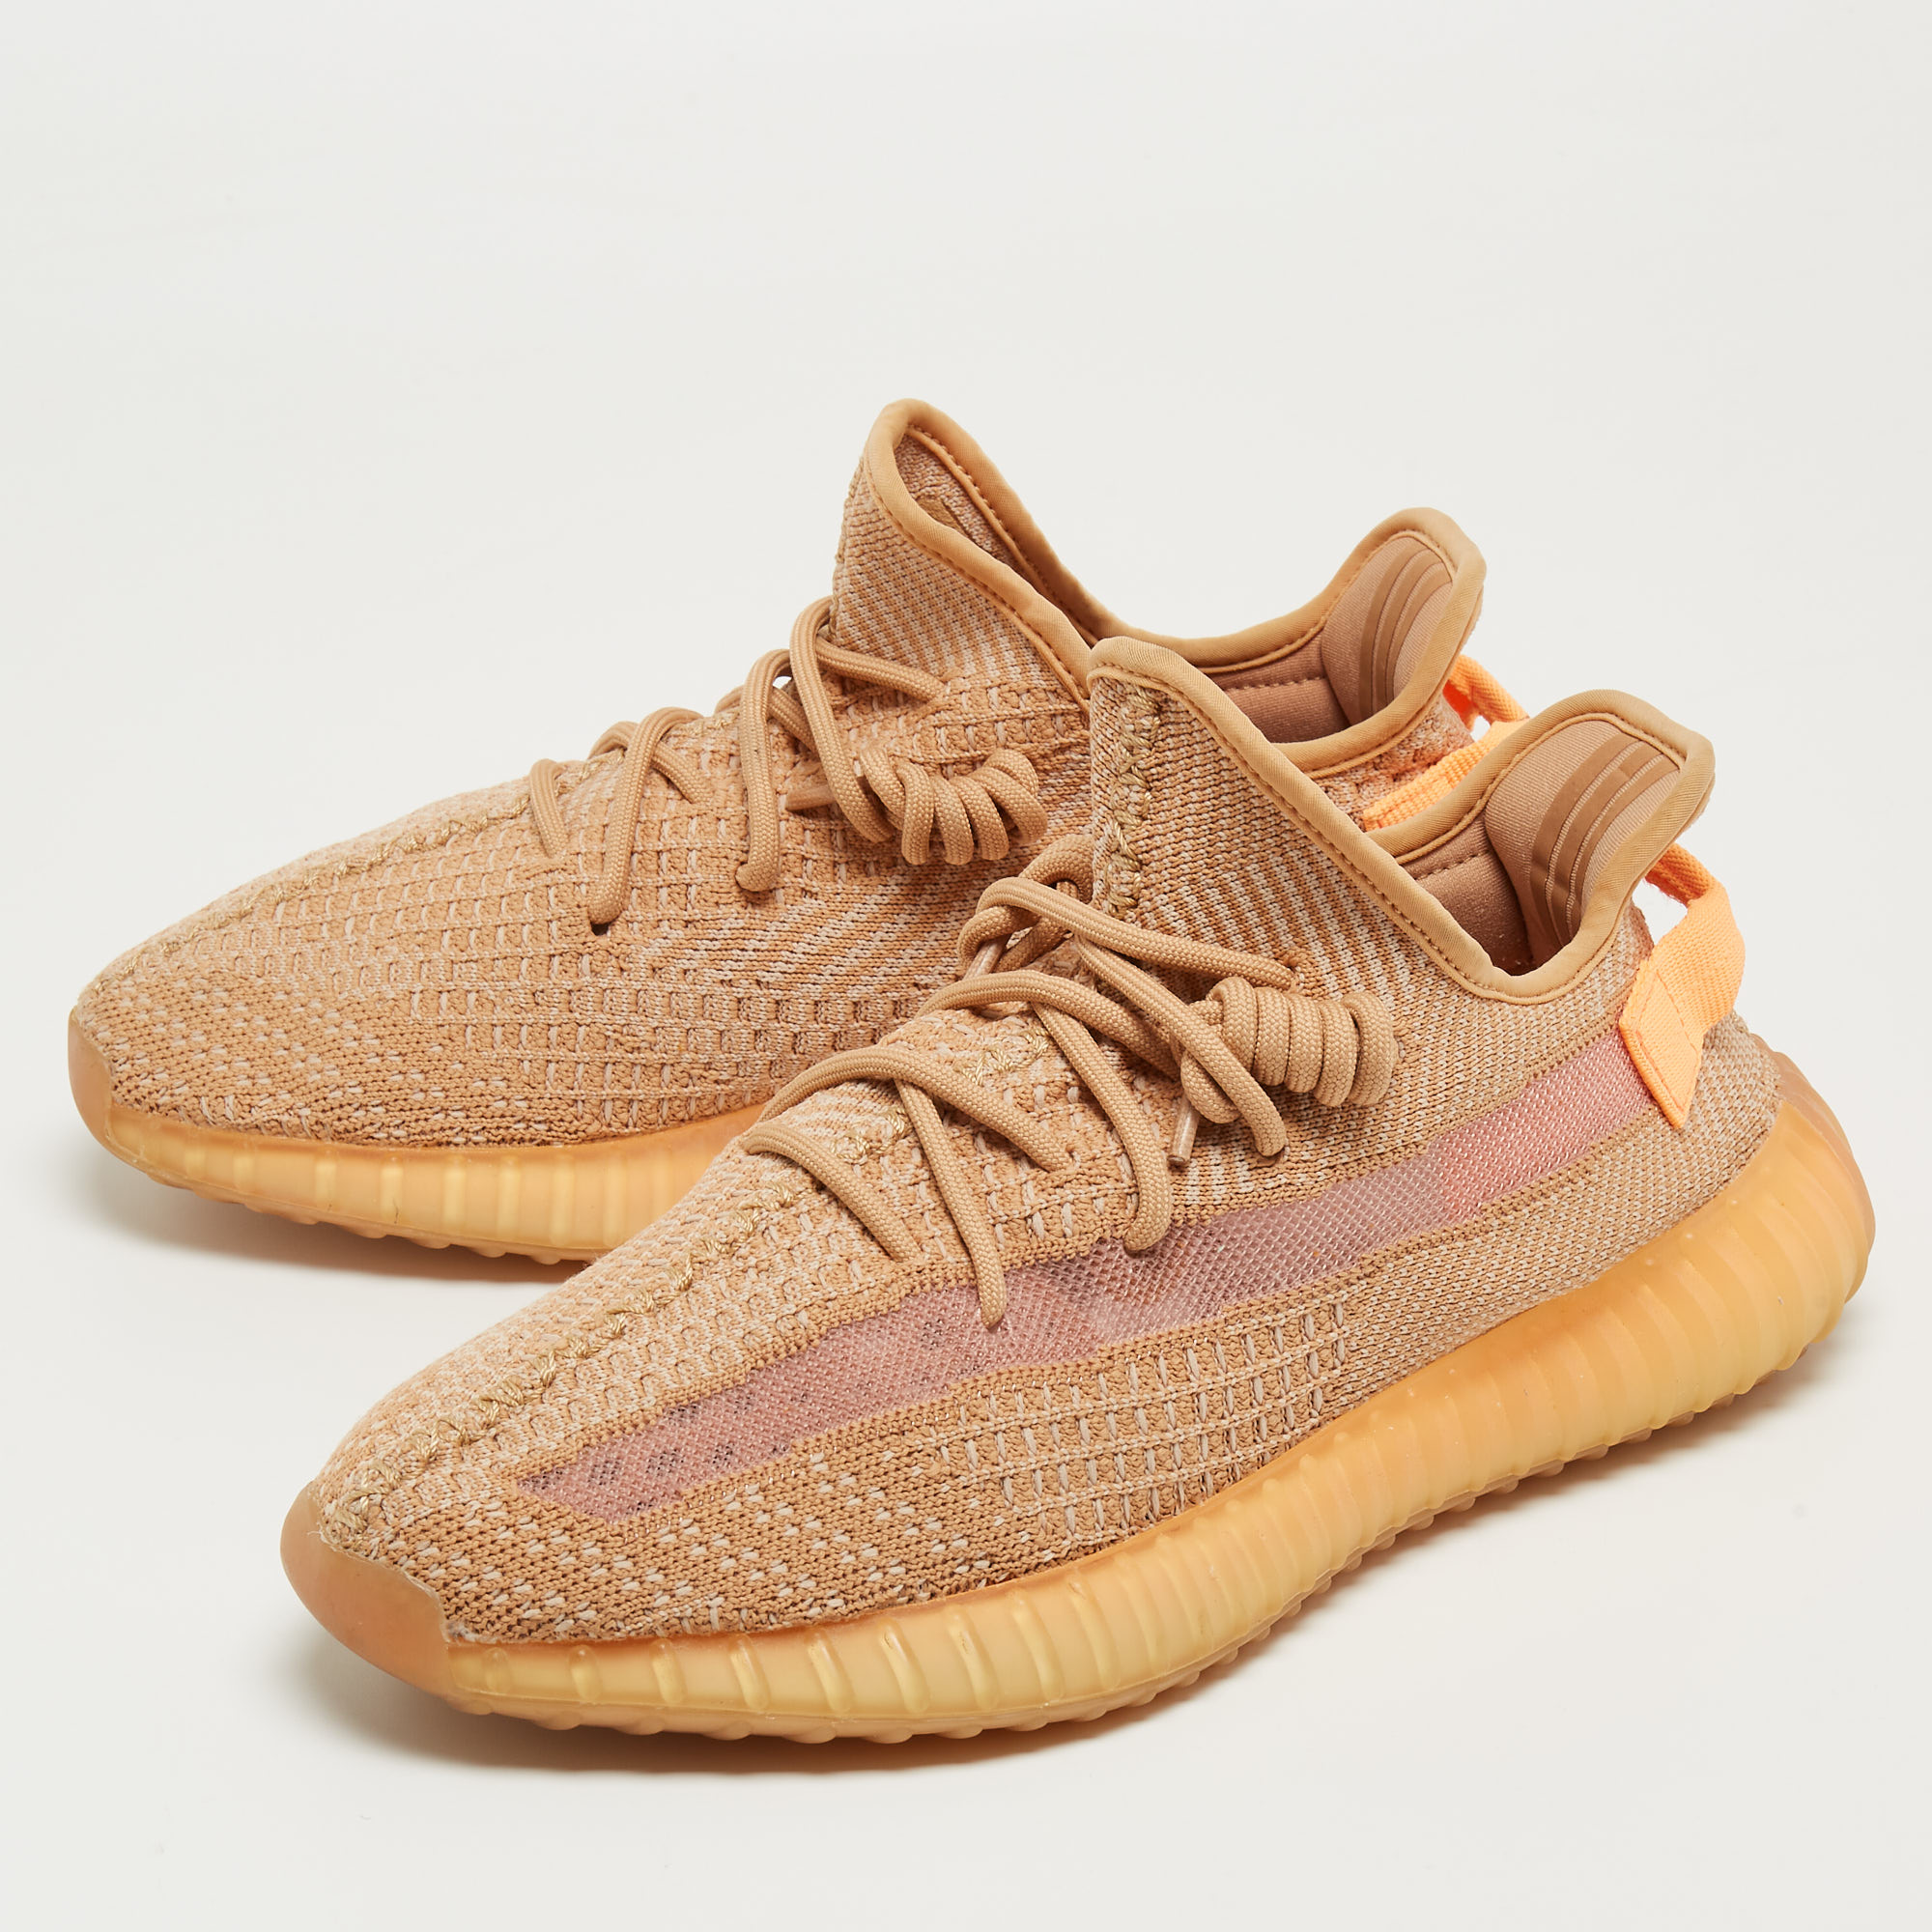 

Yeezy x Adidas Orange Knit Fabric Boot 350 V2 Clay Sneakers Size 42 1/3